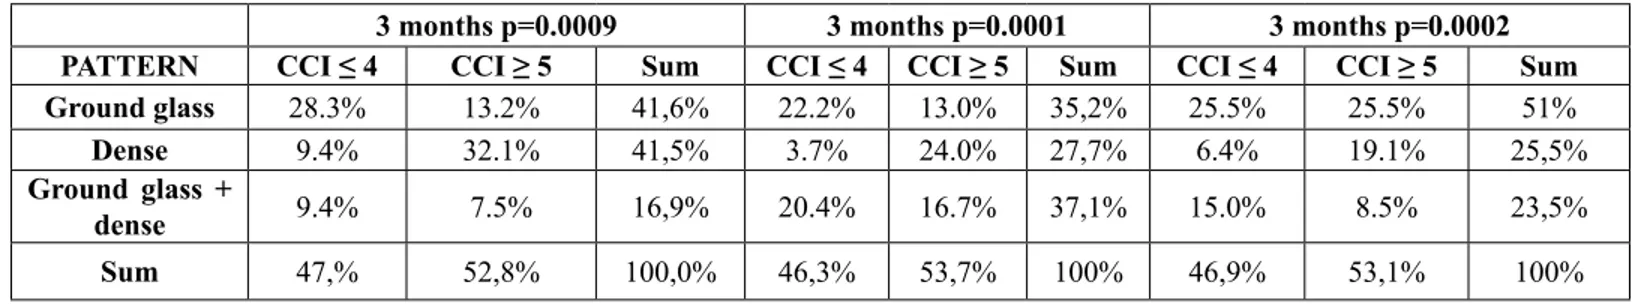 Table 6:  Lung alteration patterns variations over time (3, 6 and 12 months after  SBRT) according to CCI.